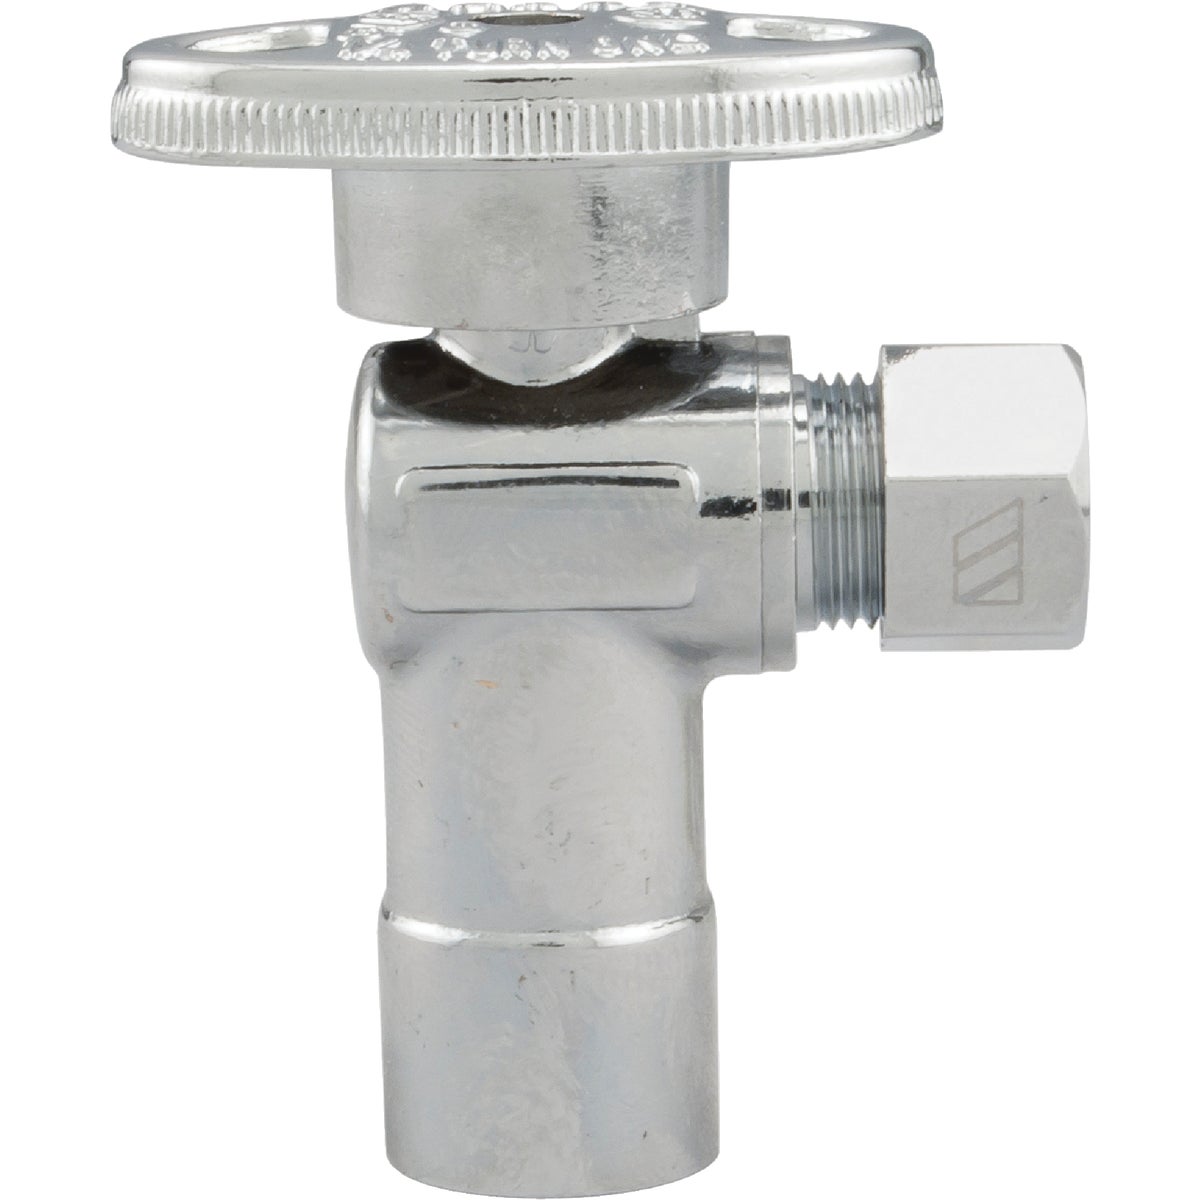 Item 400748, 1/4-turn angle valve controls water flow to household plumbing fixtures.